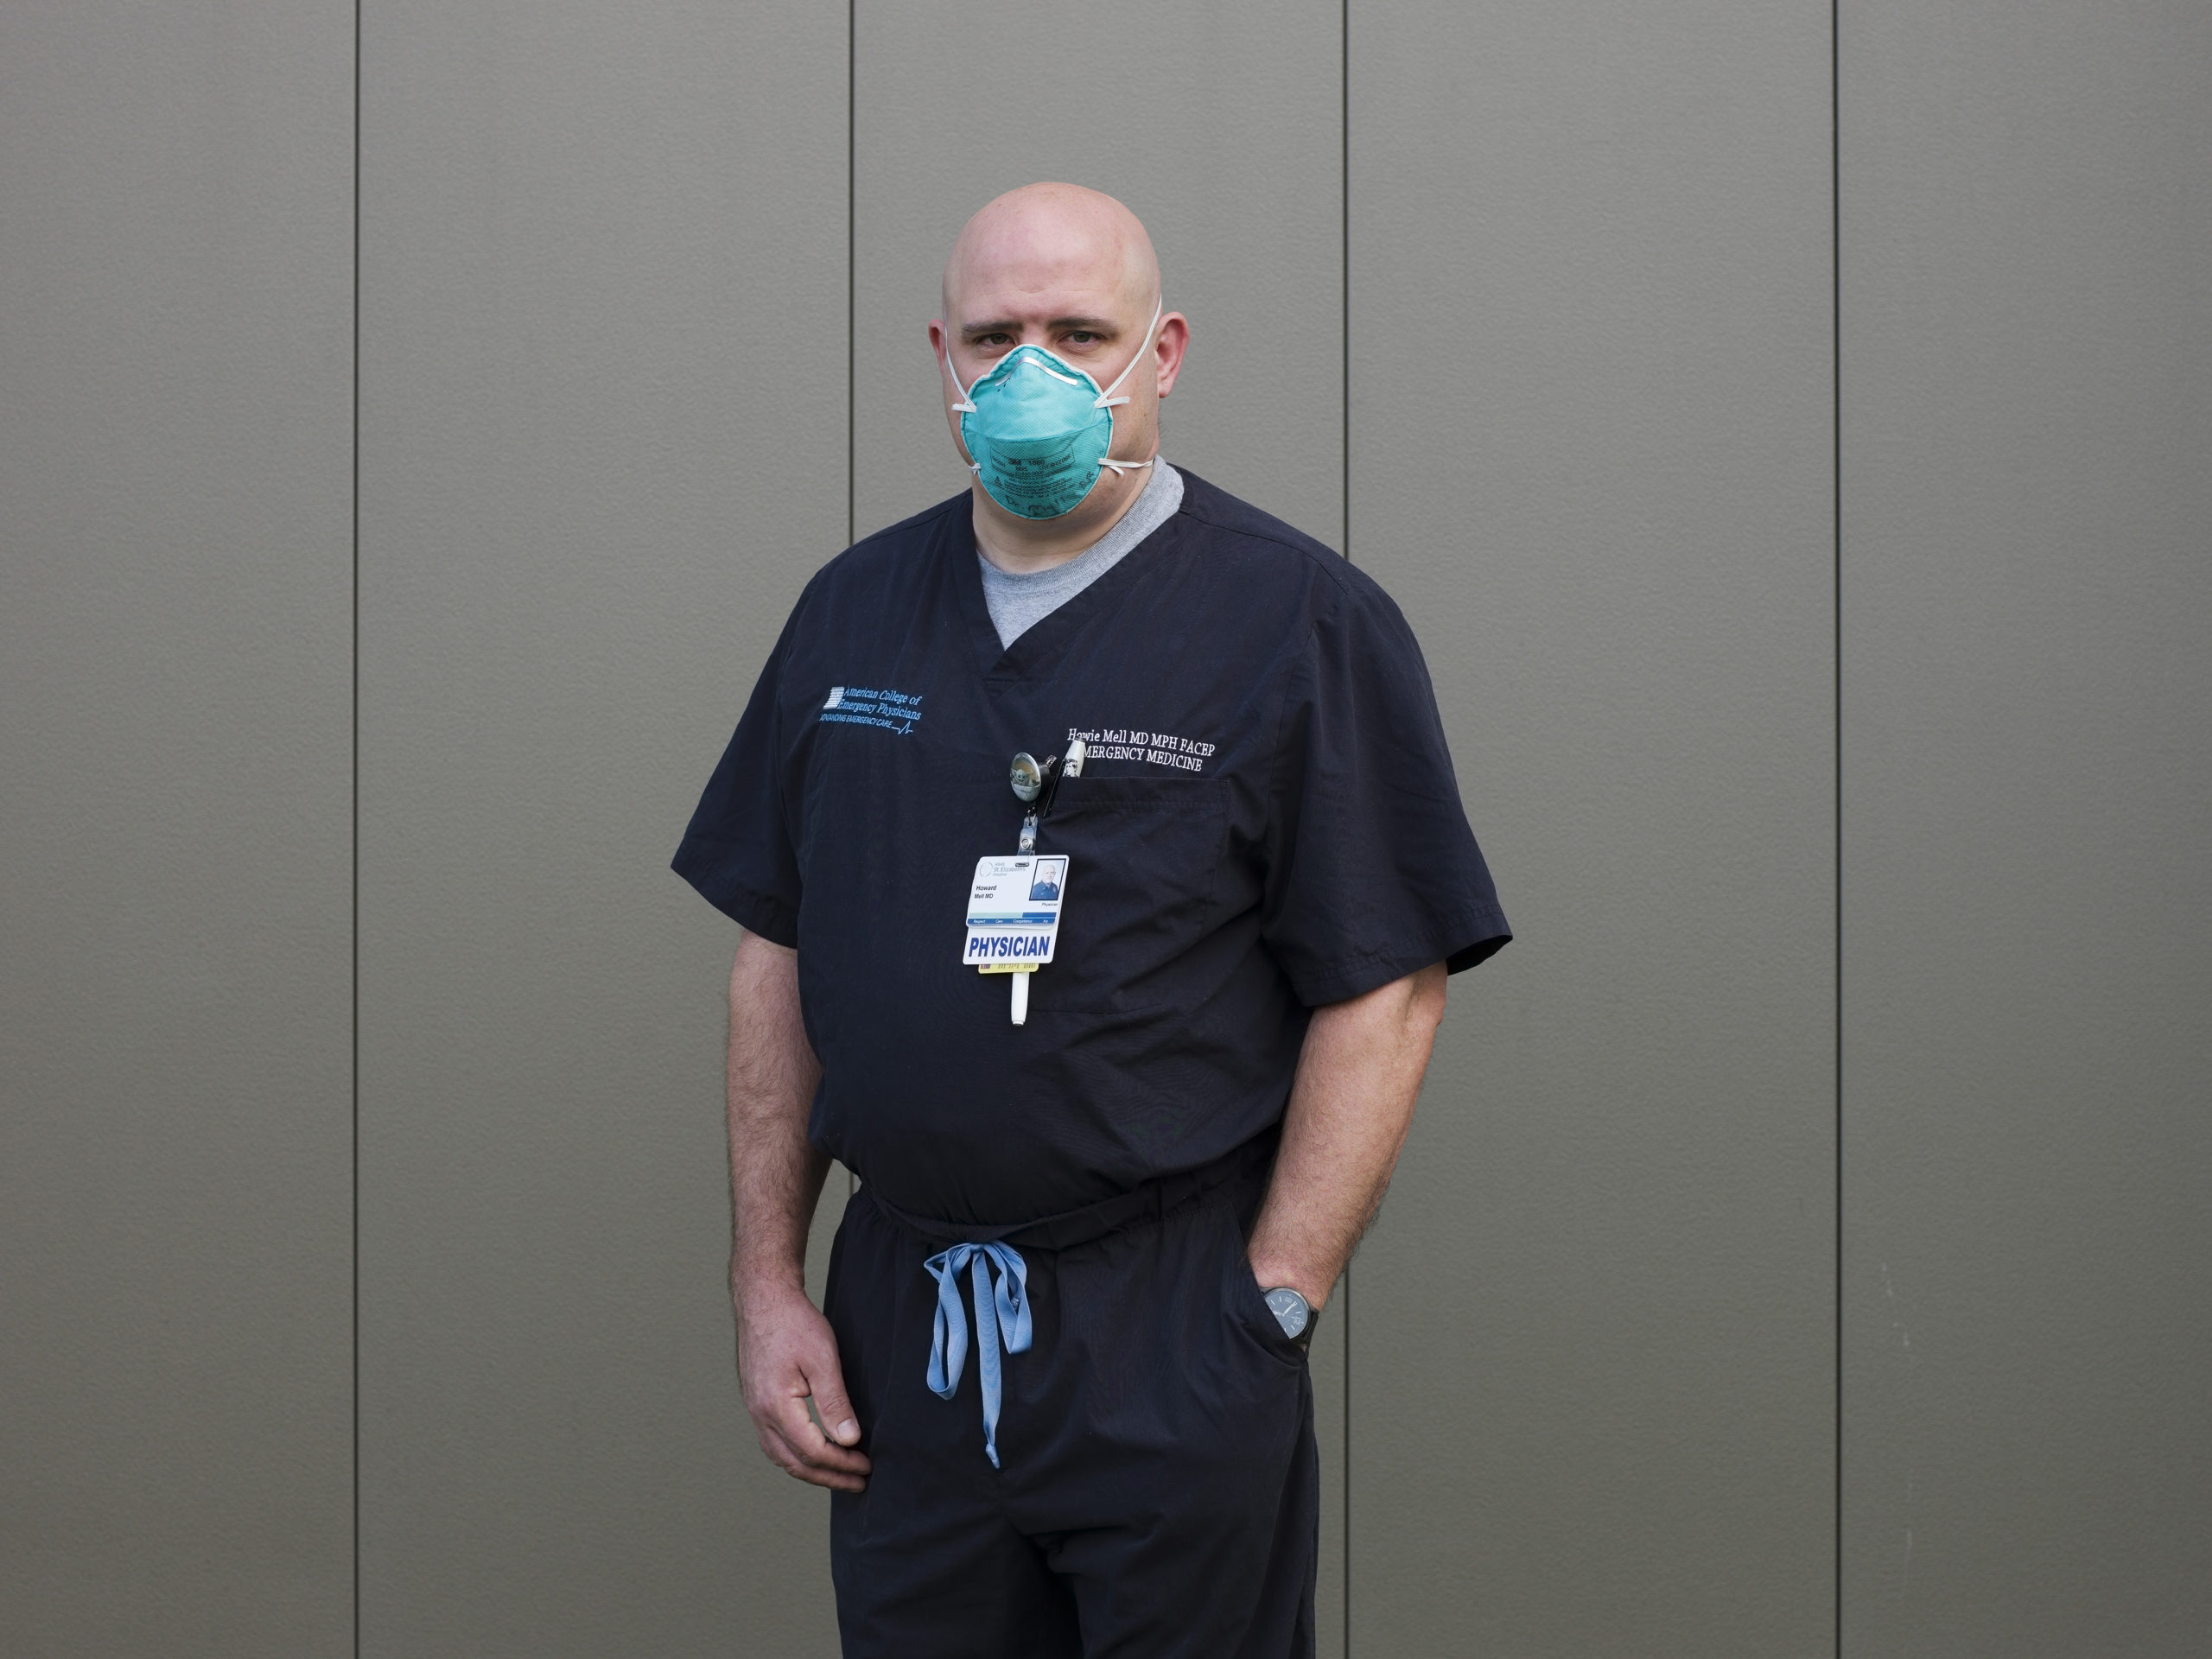 Dr. Howard Mell, an emergency room physician, in O’Fallon, Ill., Aug. 8, 2020, who said he meets several patients a week who swear by falsehoods they found on the internet. (Jess T. Dugan/The New York Times)